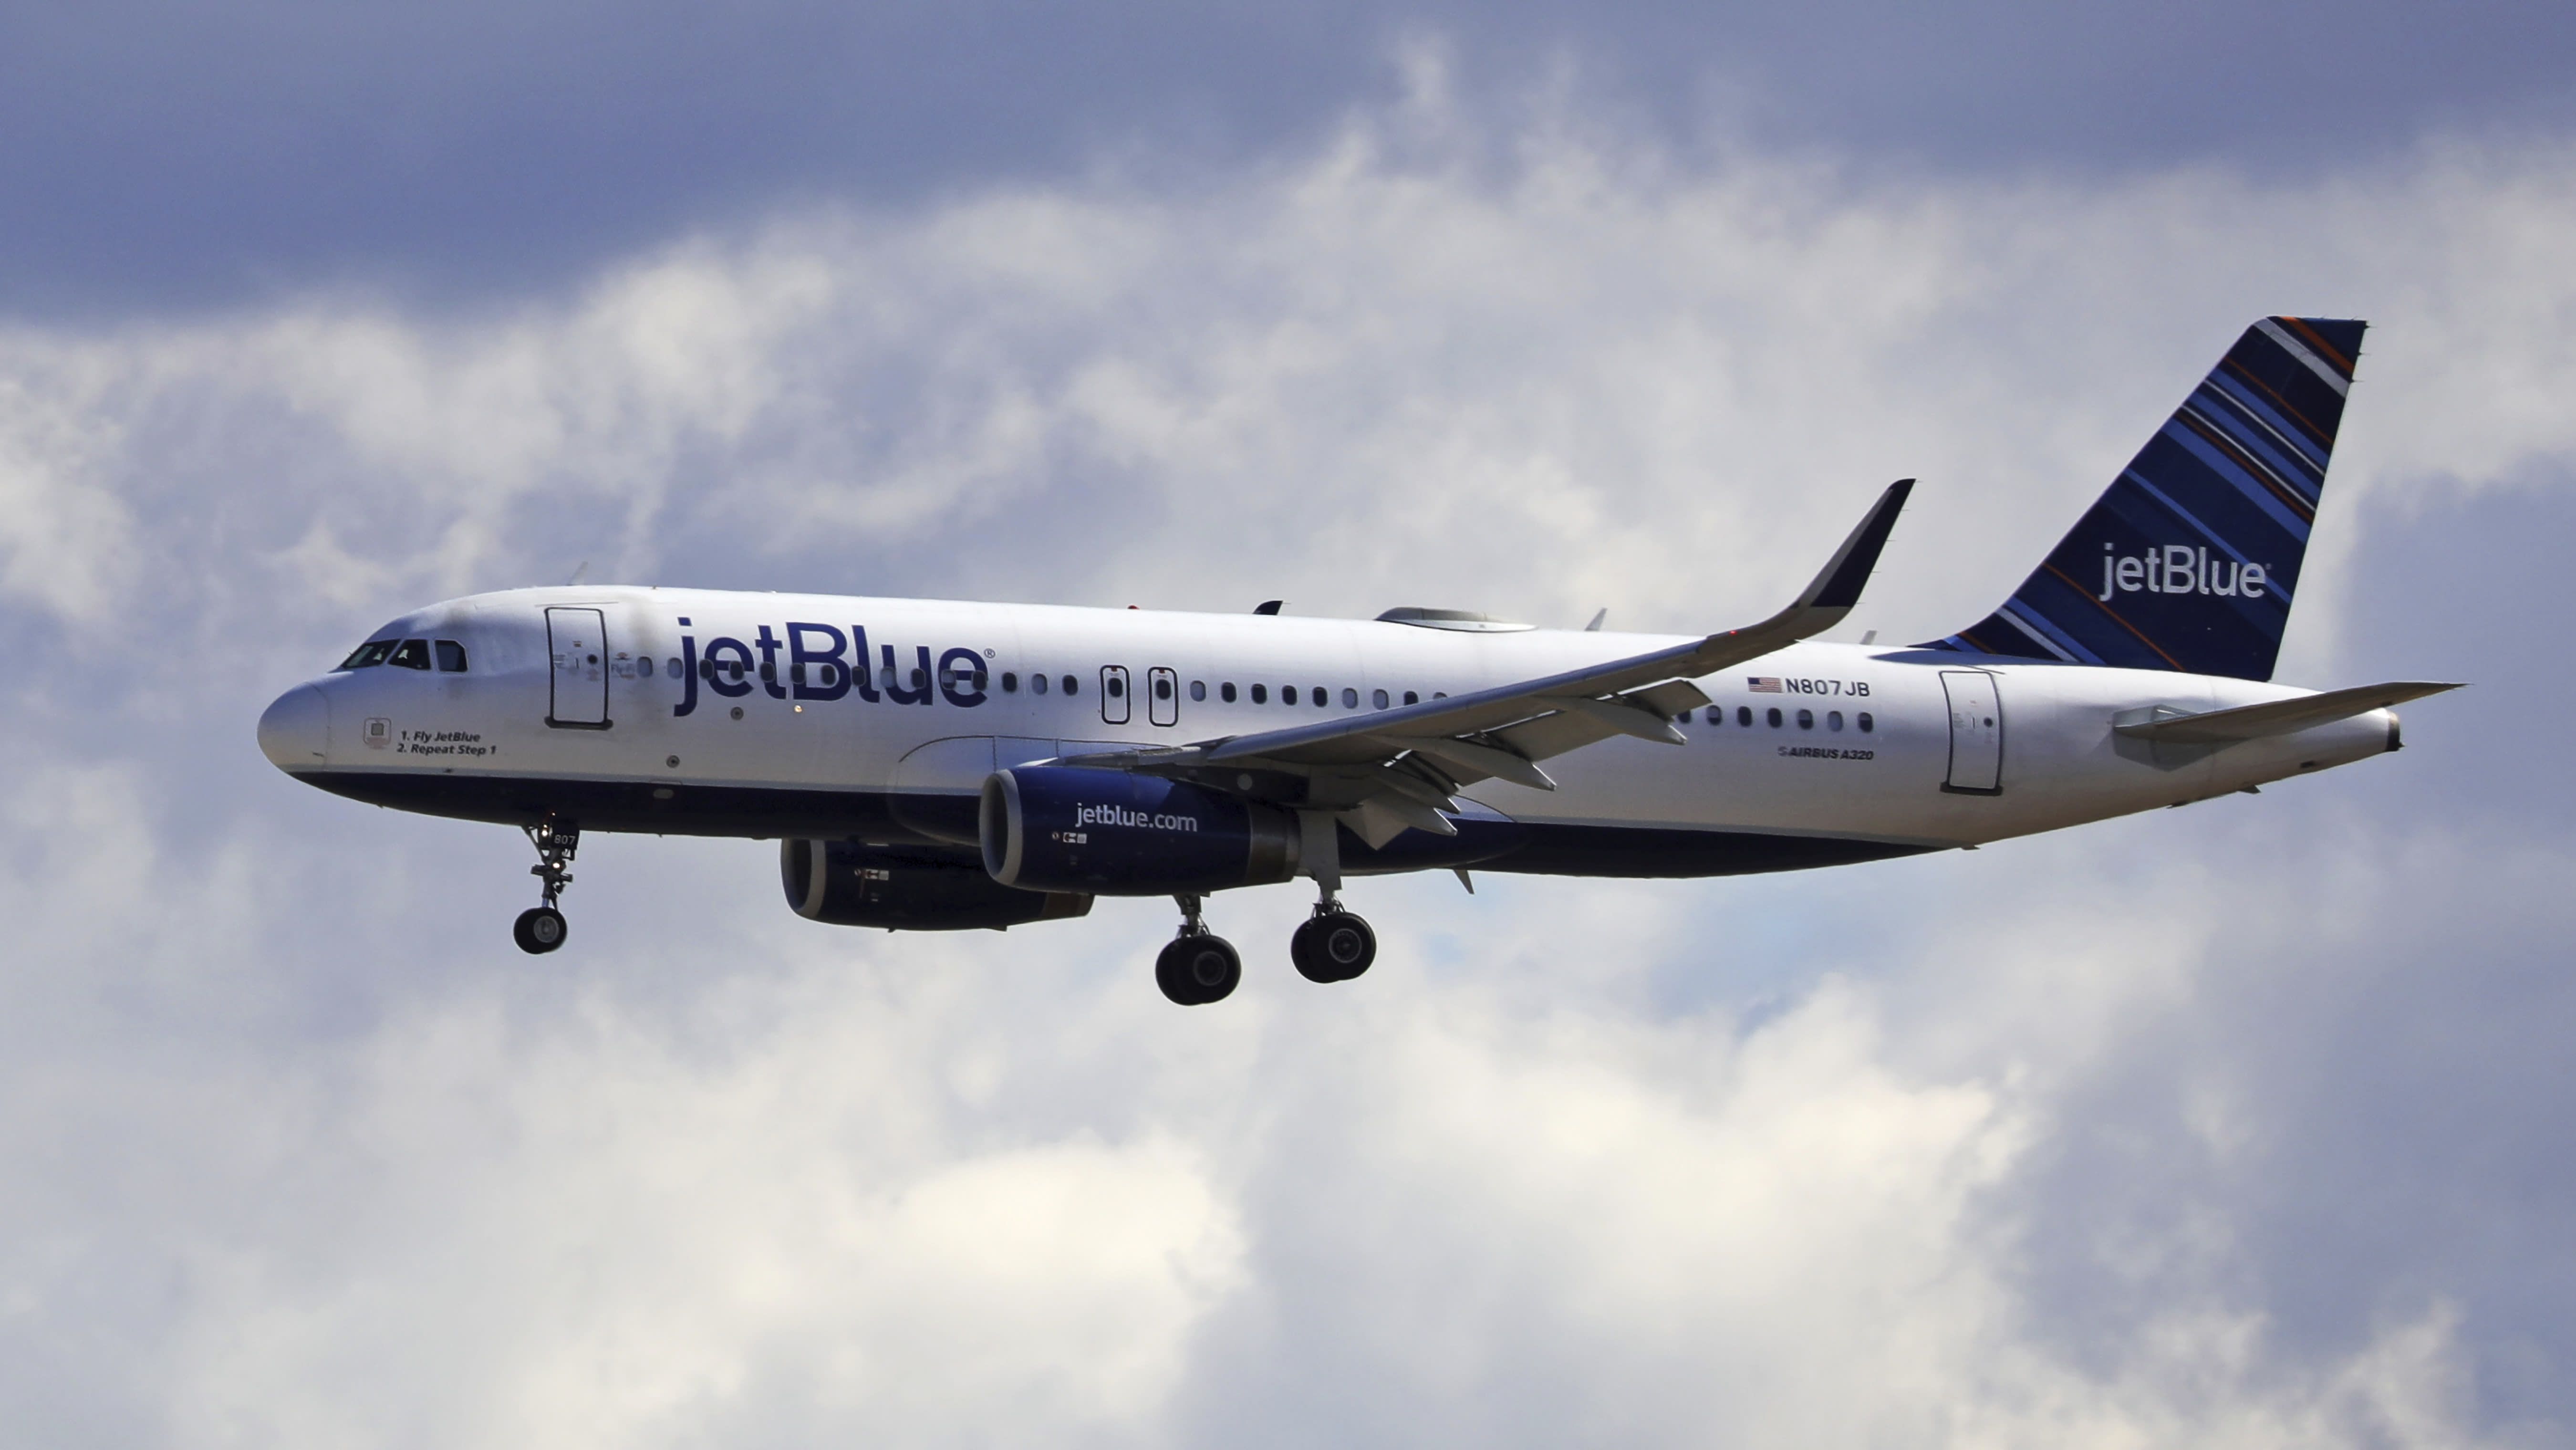 jetblue-ceo-discusses-2020-outlook-boeing-backlash-video